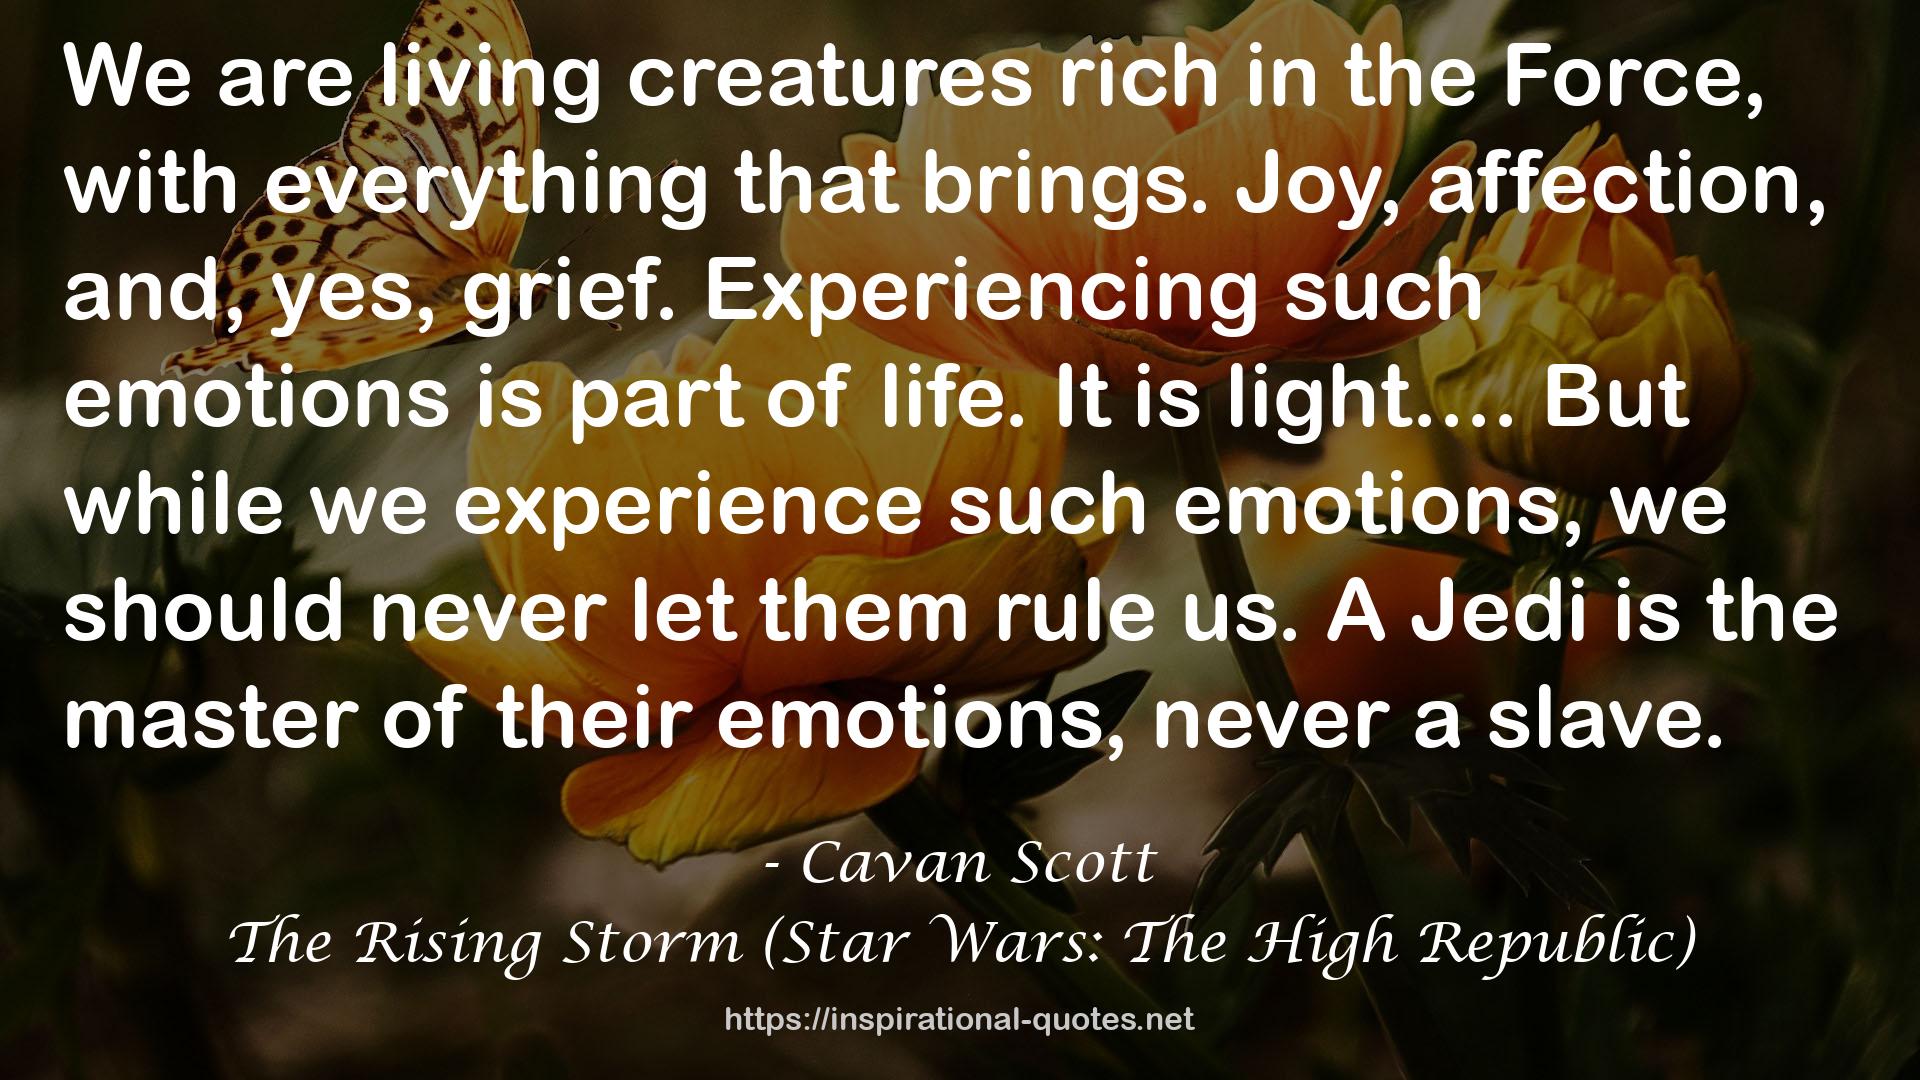 The Rising Storm (Star Wars: The High Republic) QUOTES